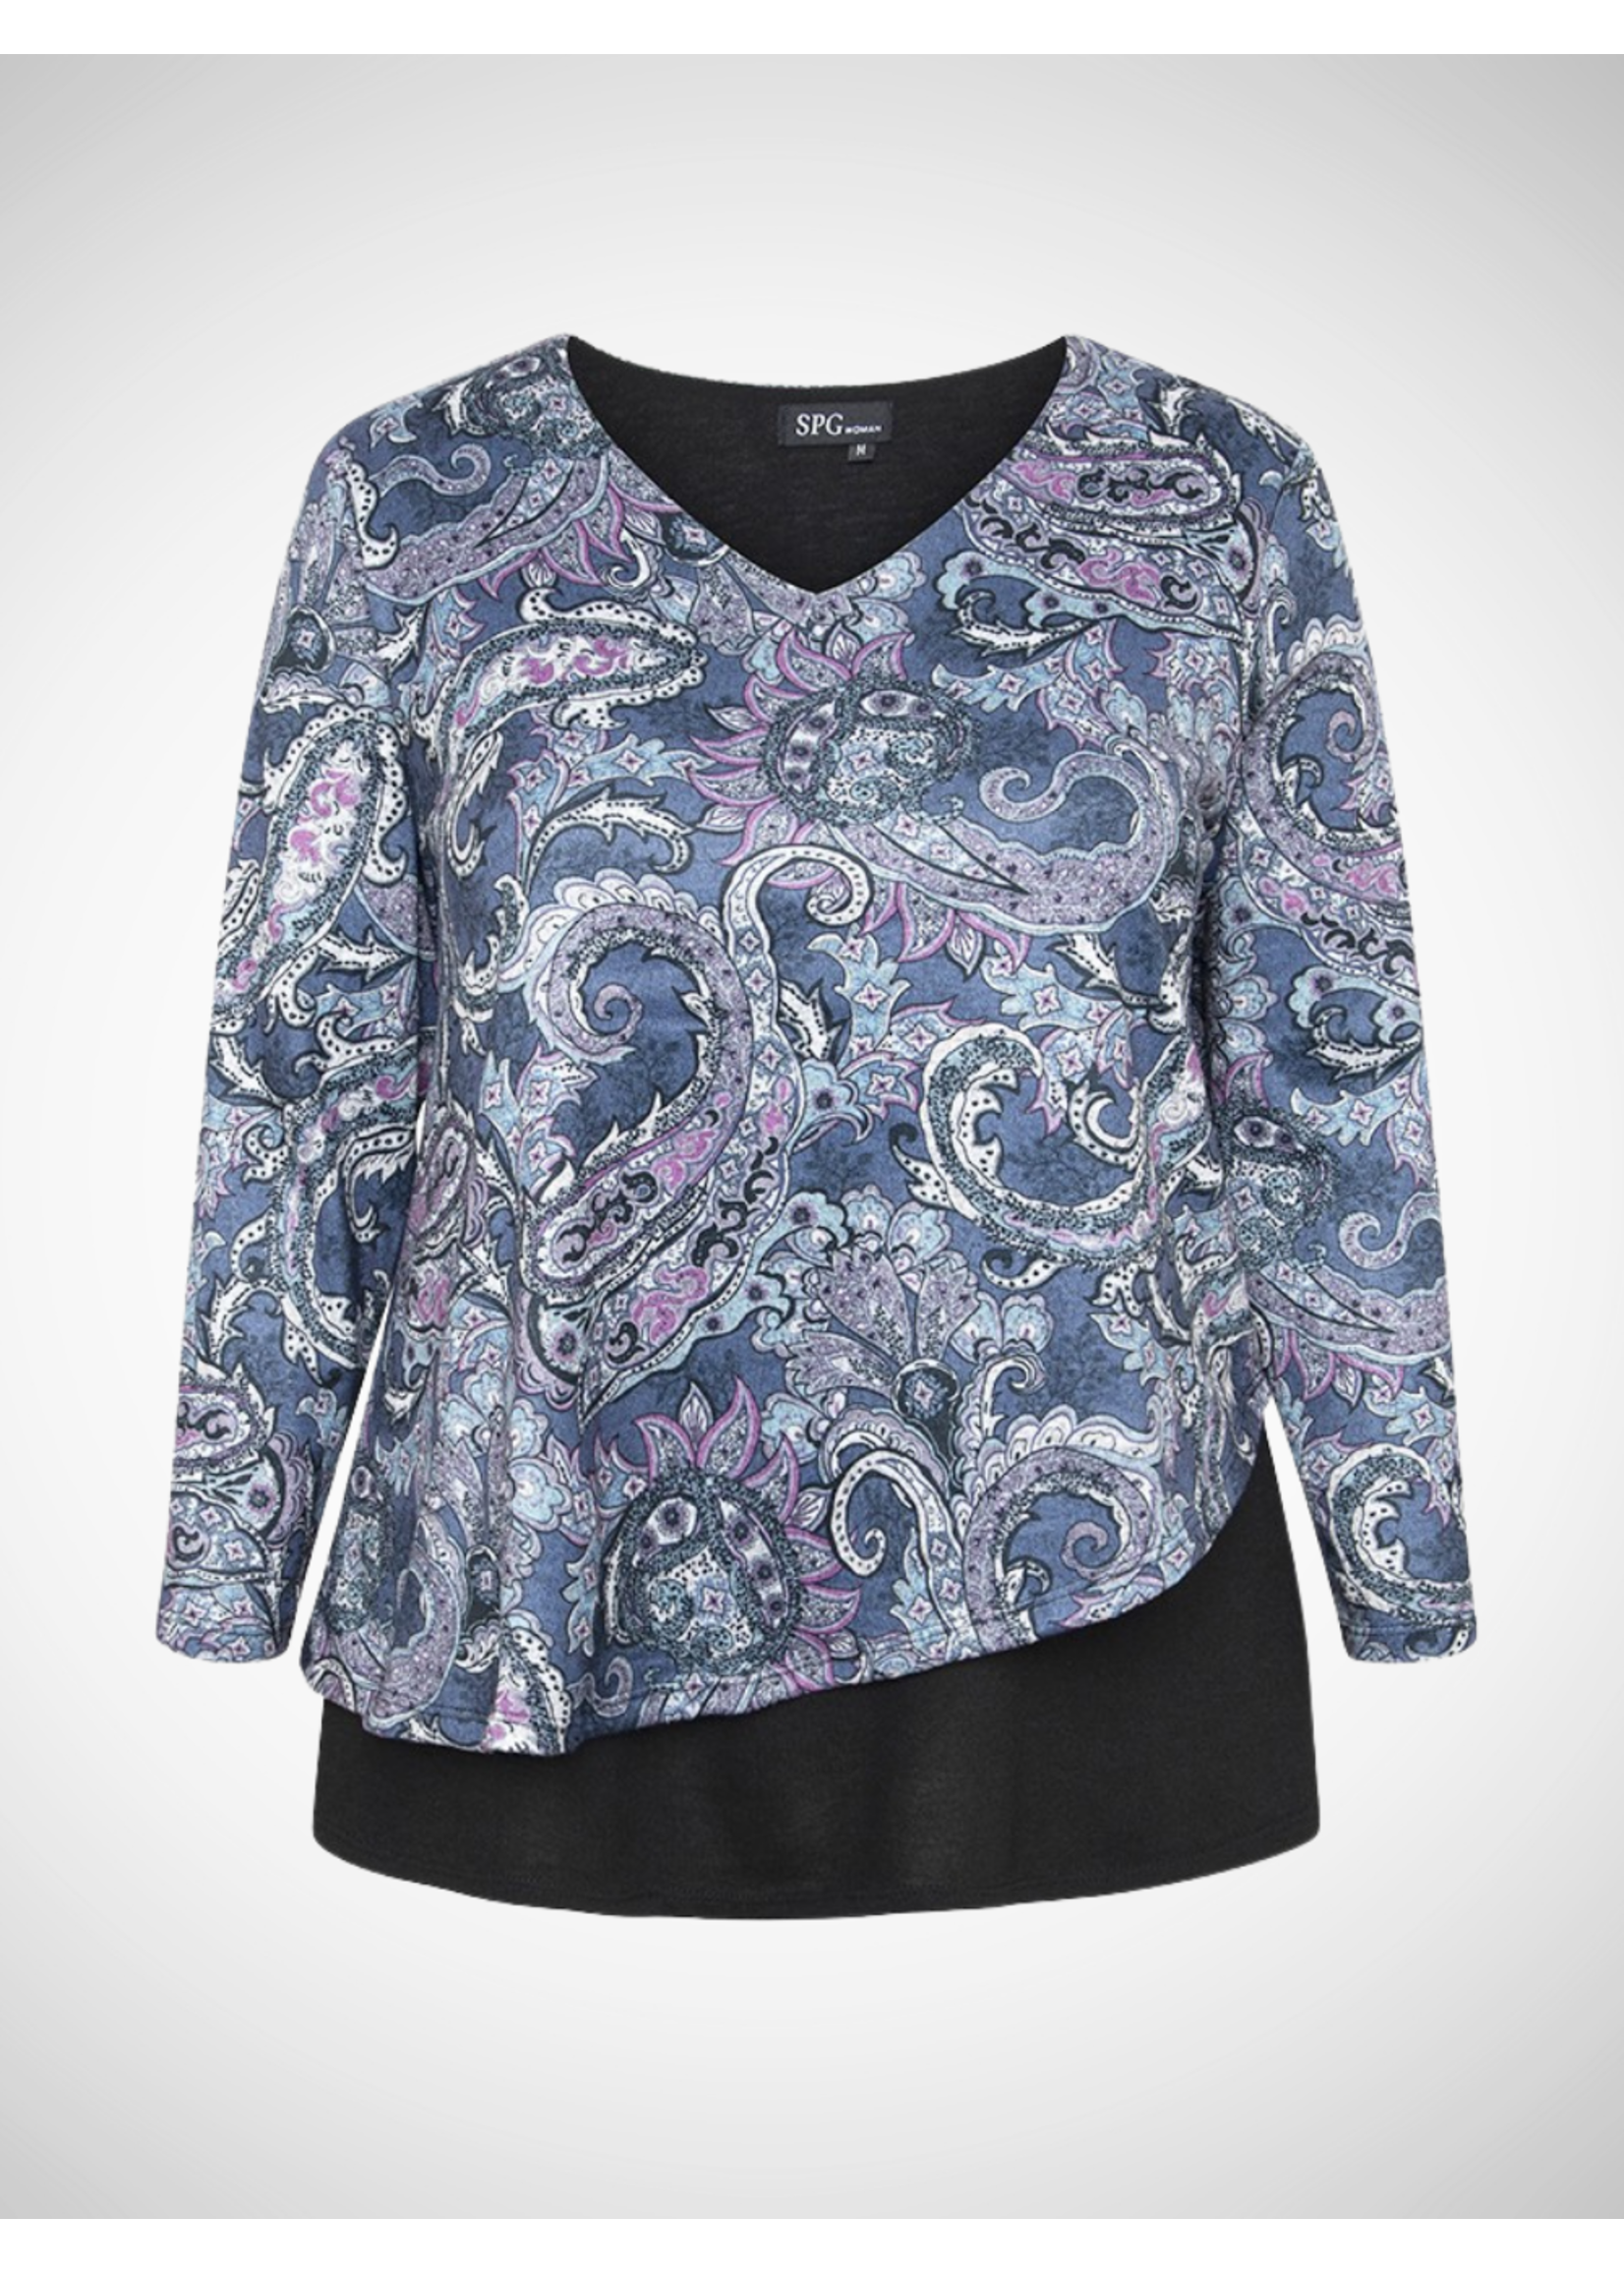 SPG Woman Paisley Cape Sweater